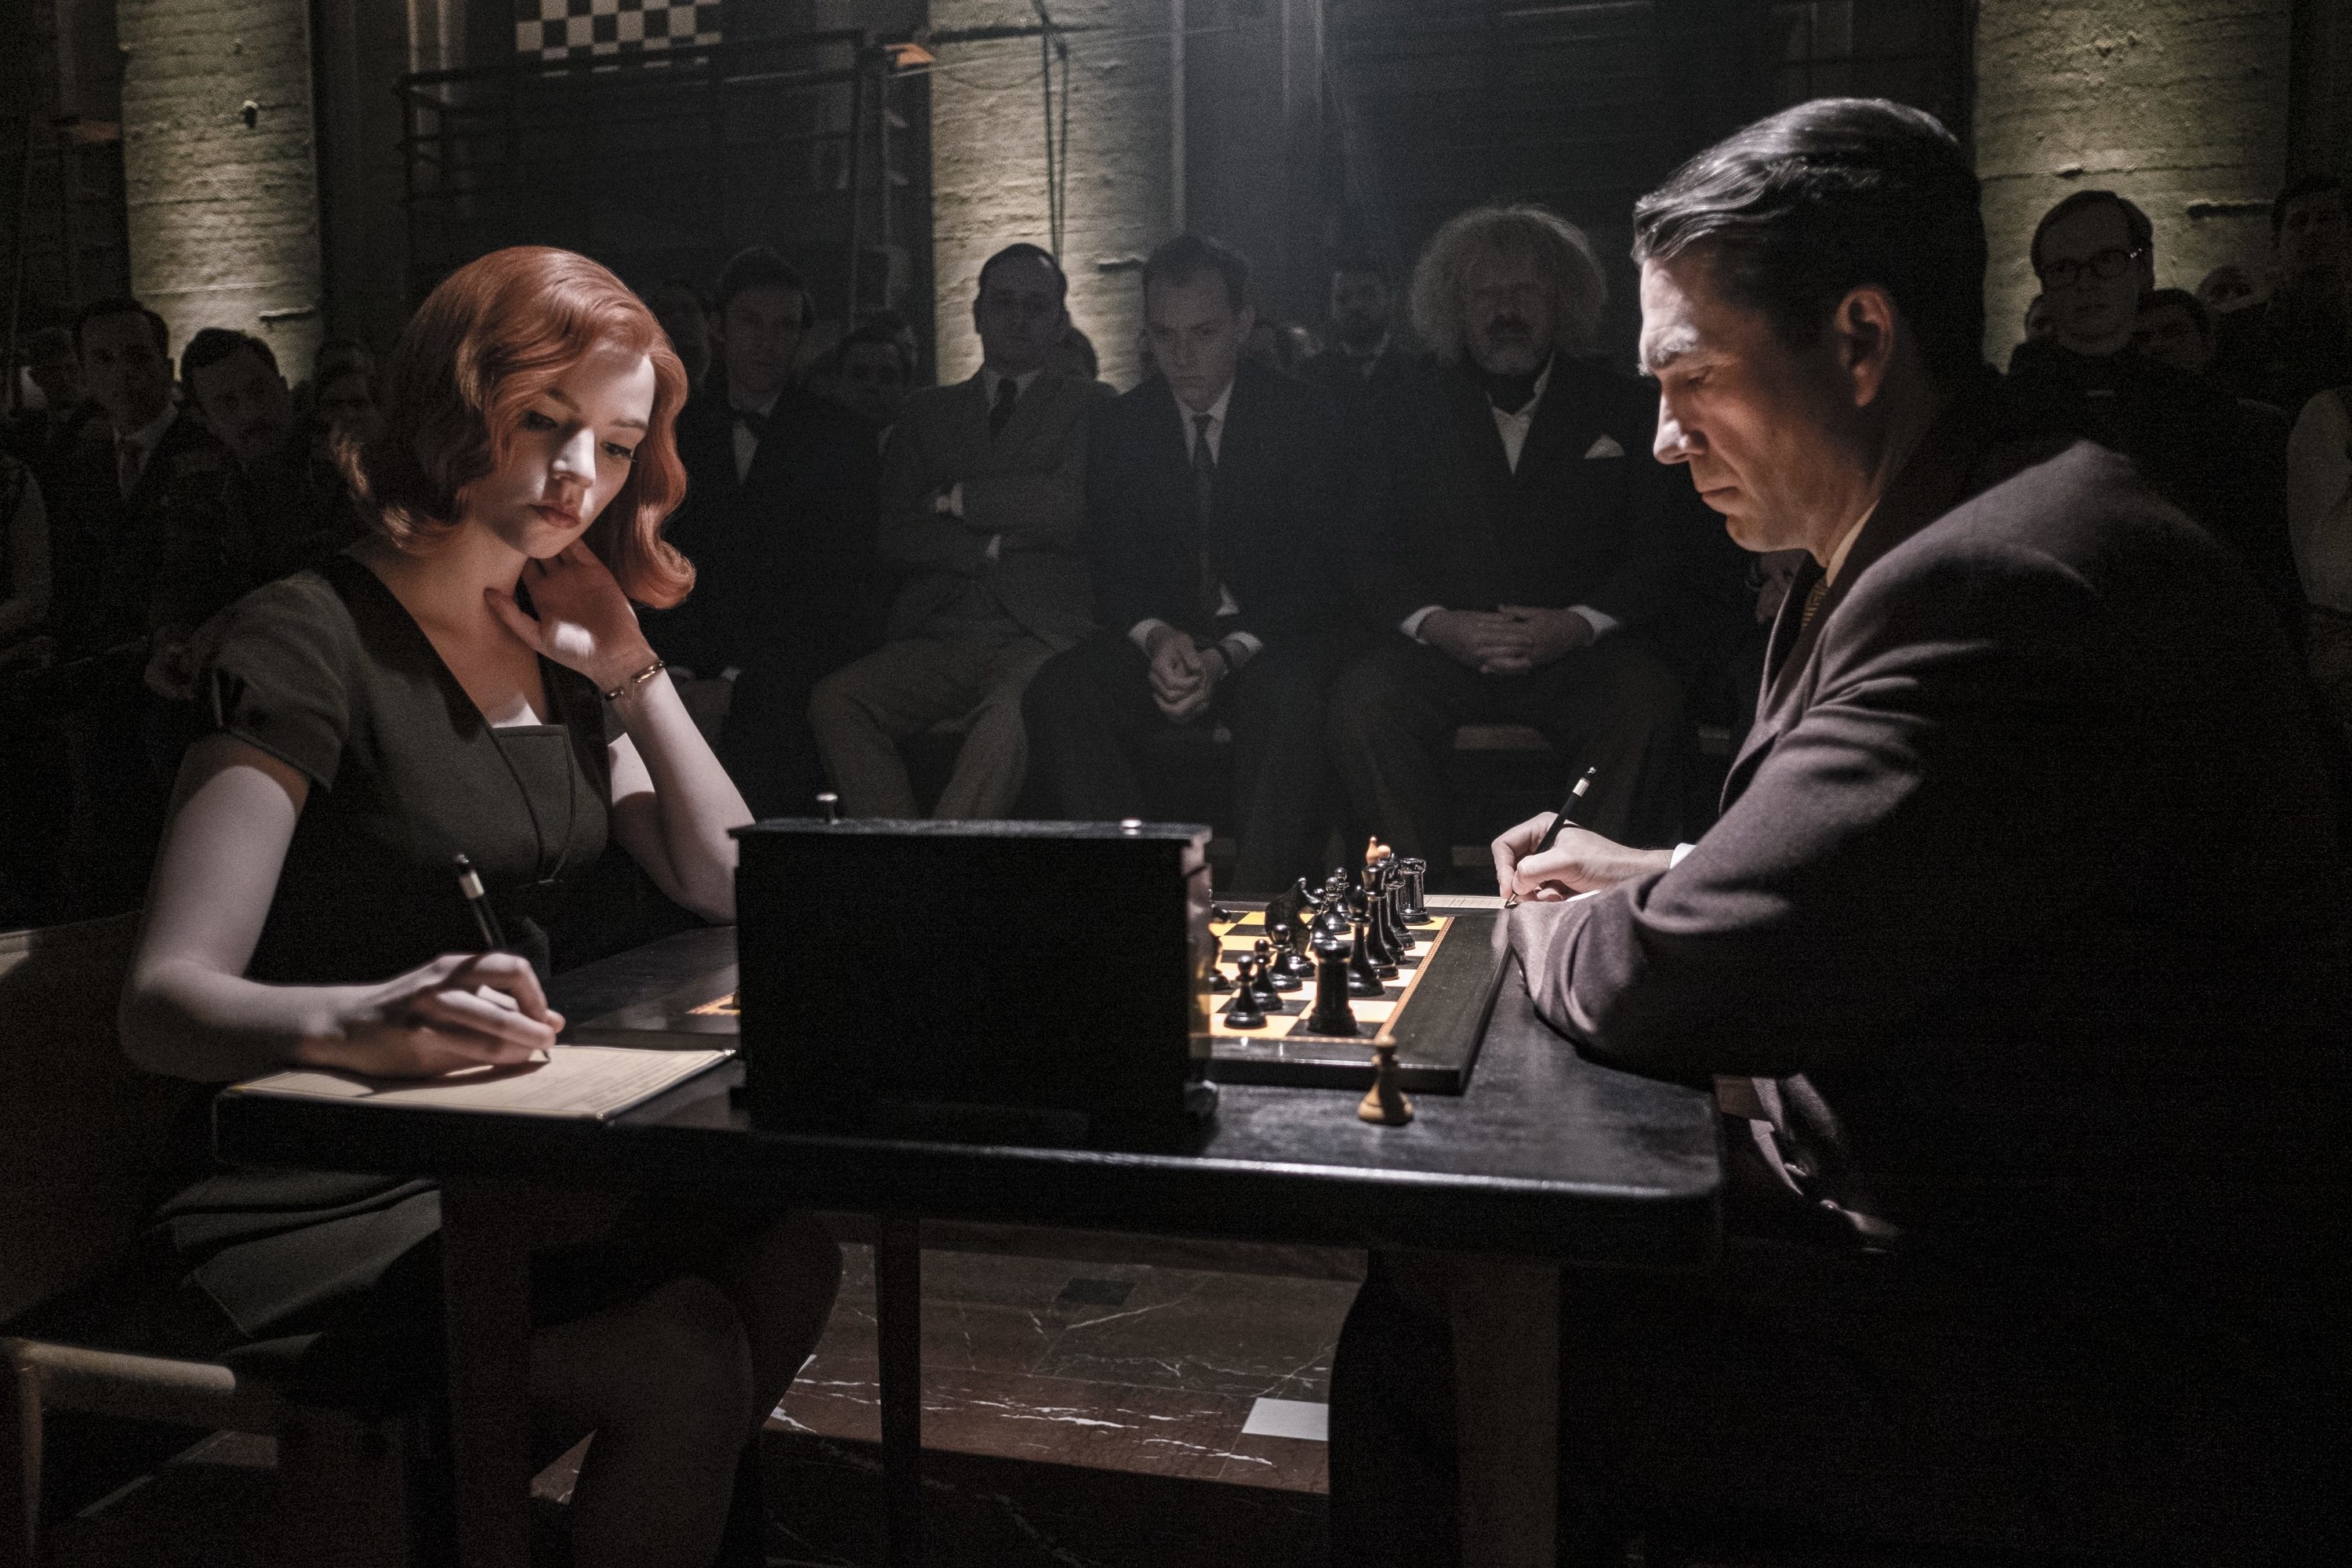 The Queen's Gambit Is the Forrest Gump Of Chess